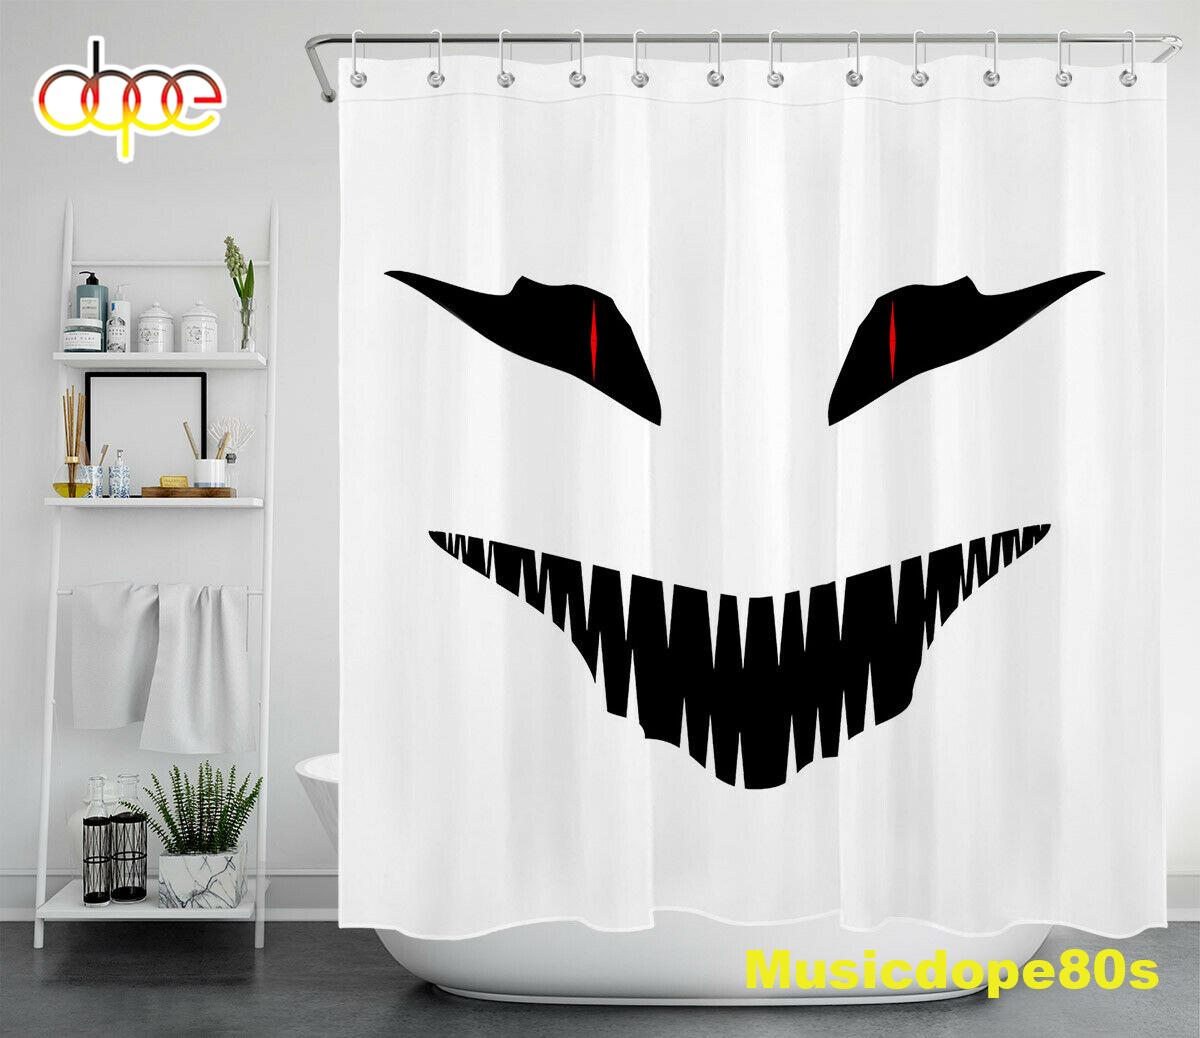 Abstract Funny Ghost Face Black White Waterproof Fabric Shower Curtain 1